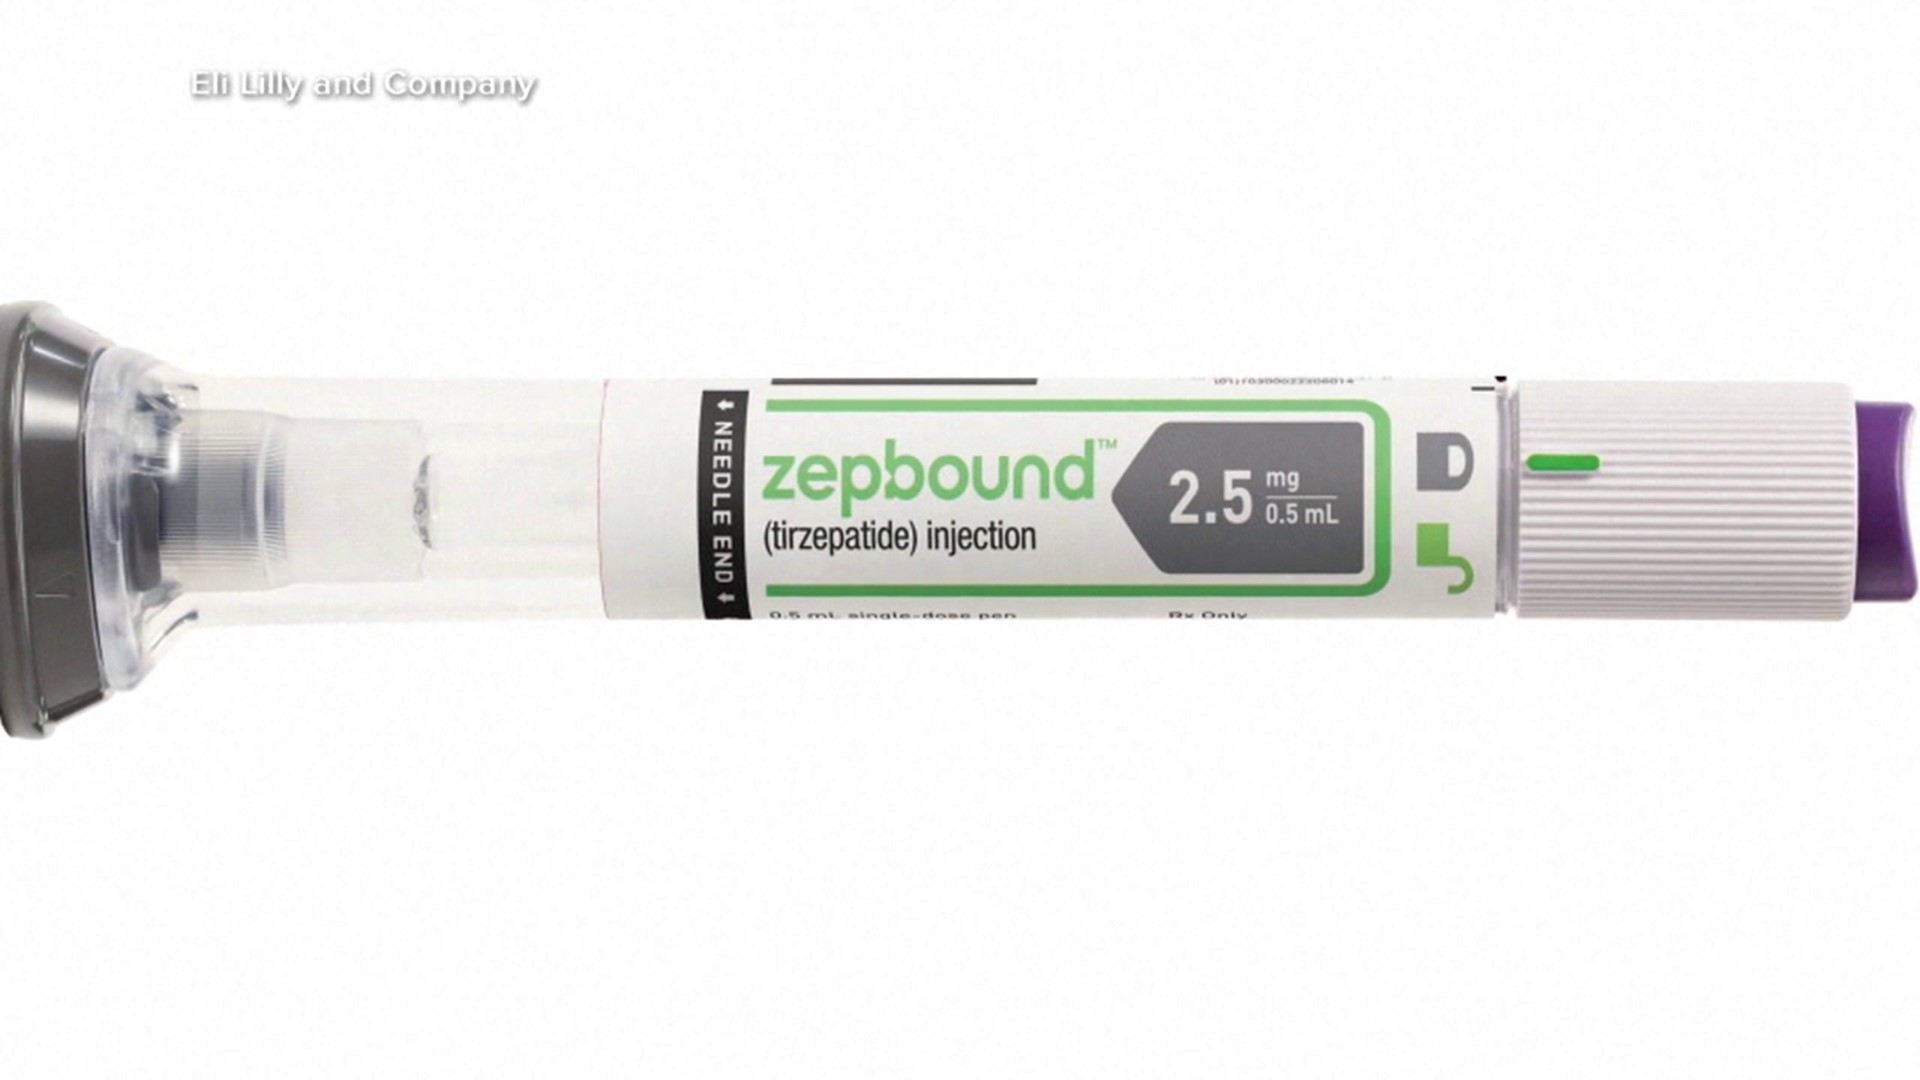 A new version of a popular diabetes medication can now be sold as a weight loss drug. The FDA approved the drug Zepbound which is similar to Ozempic and Wegovy.